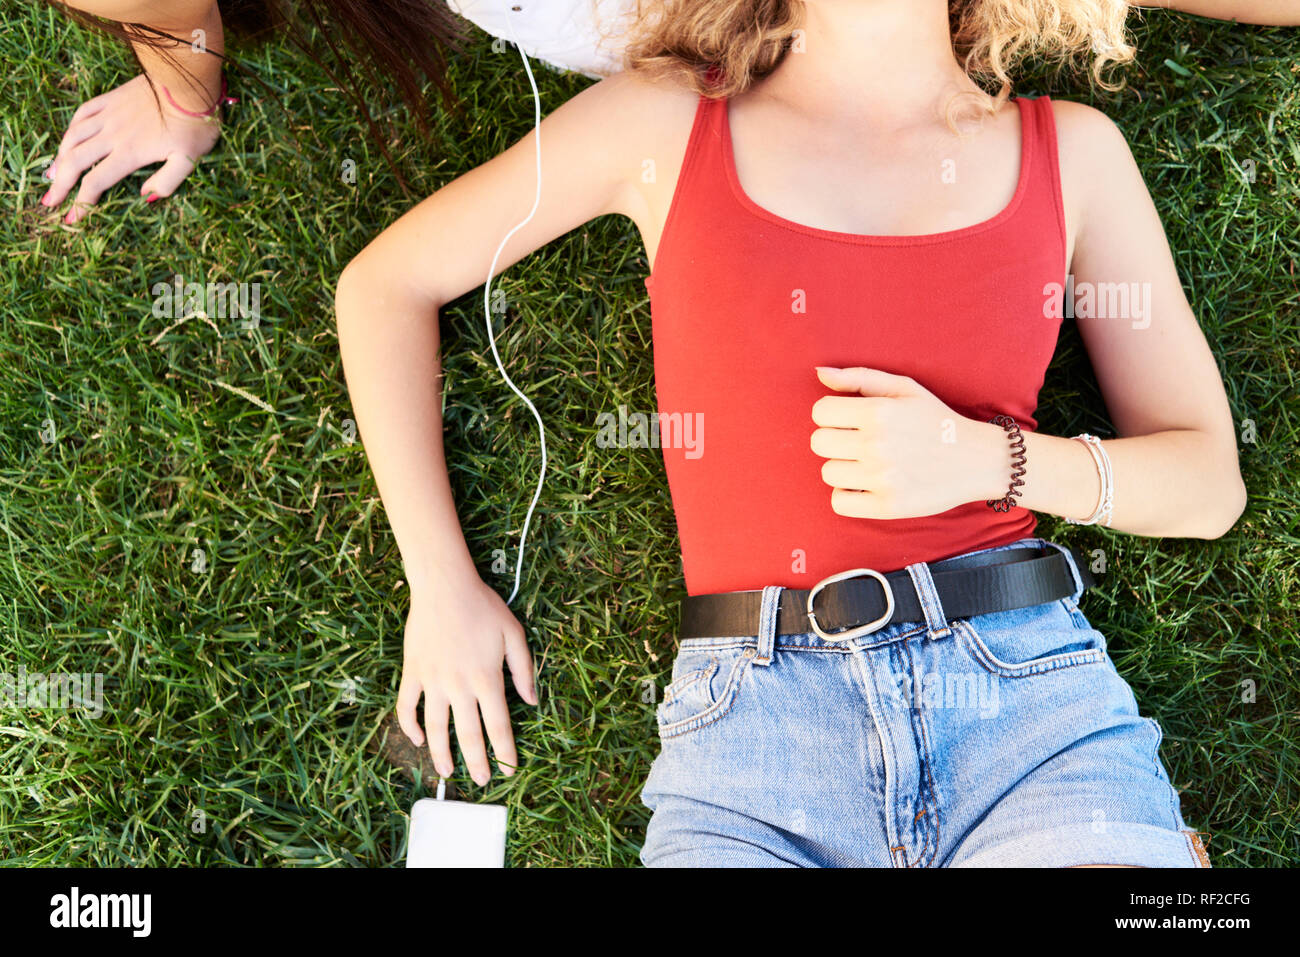 Young woman lying in grass with friend listening to music Stock Photo